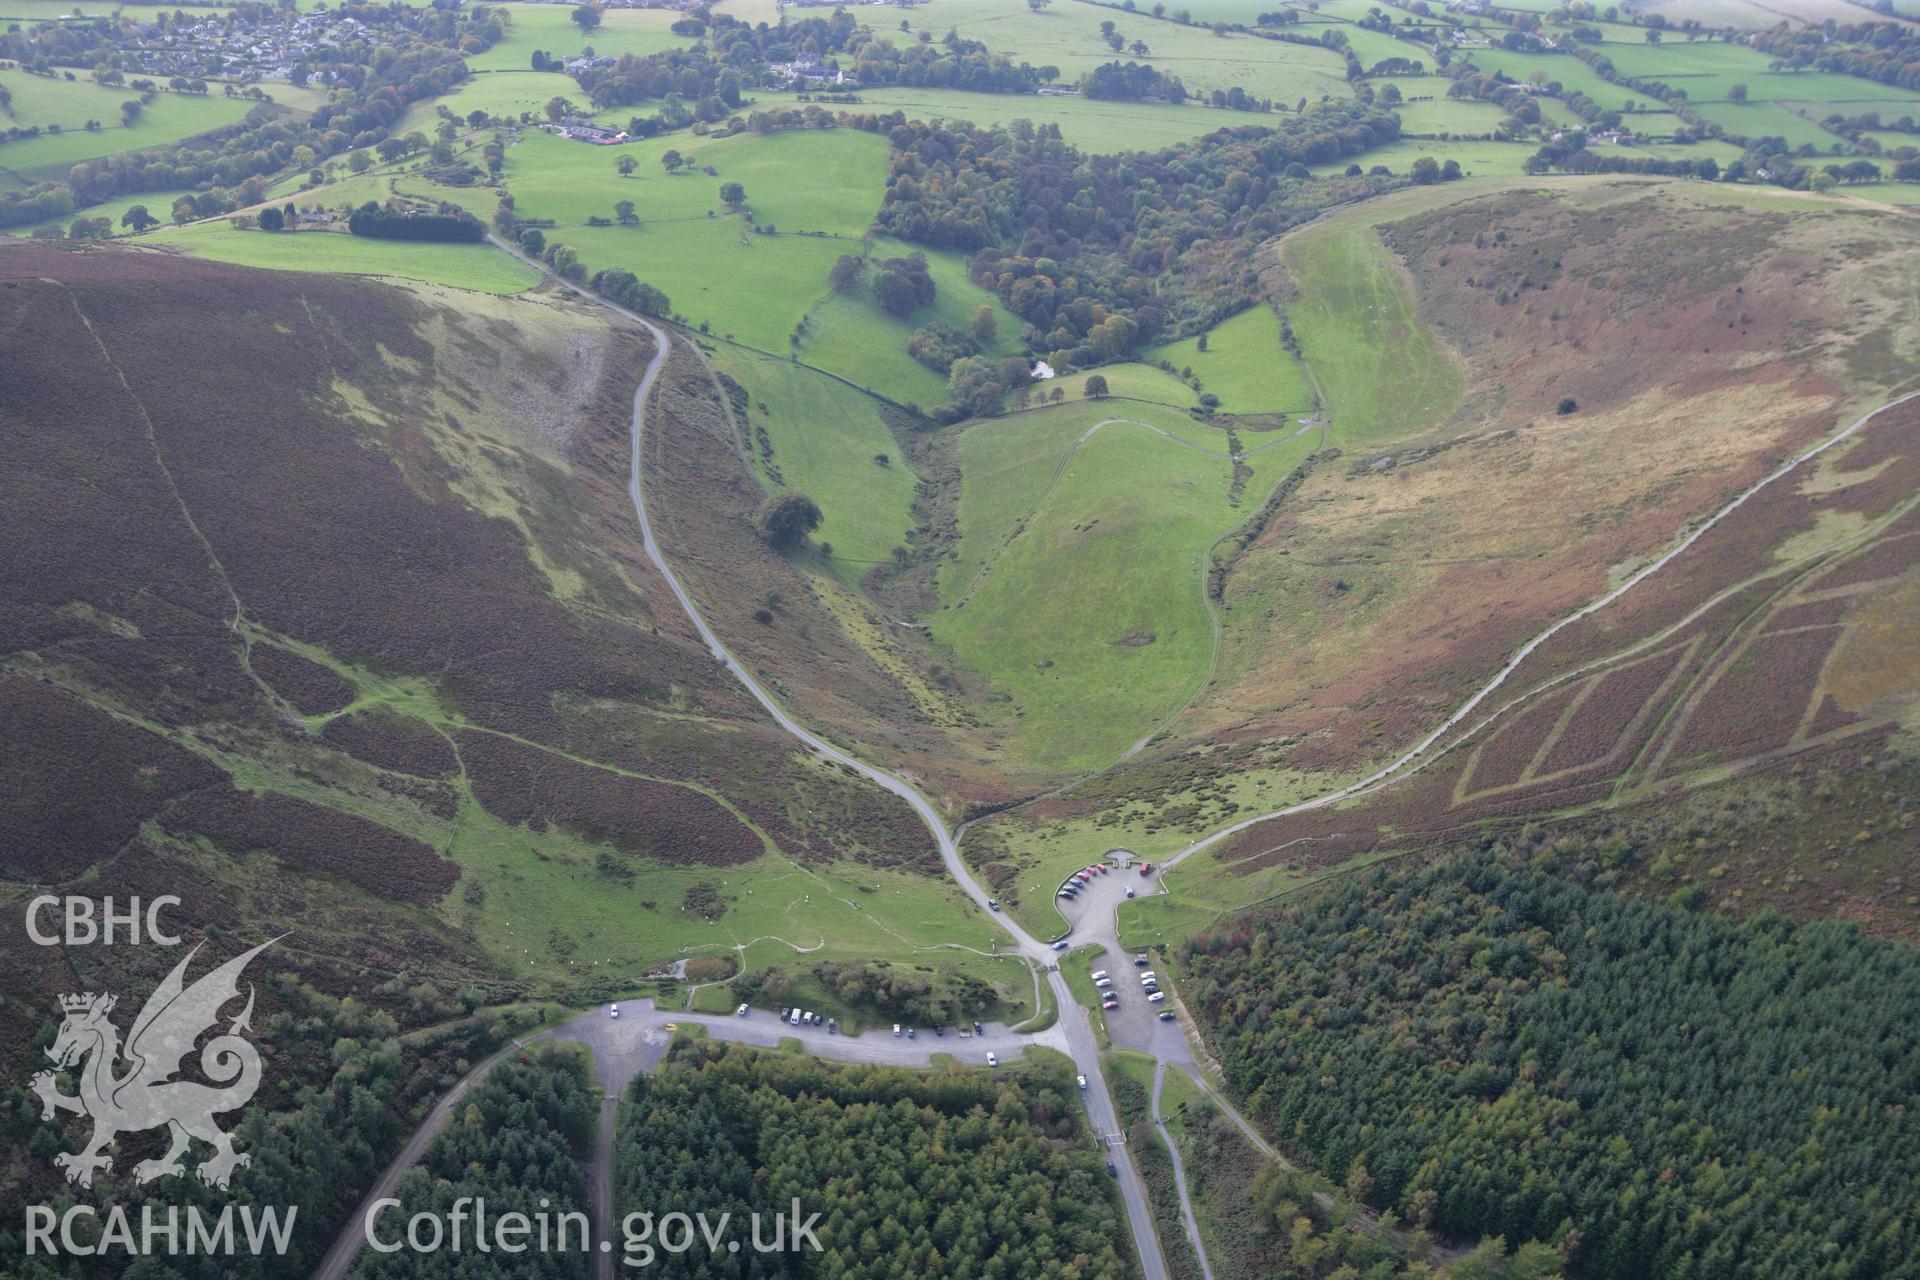 RCAHMW colour oblique aerial photograph of Foel Fenlli Hillfort showing the car park. Taken on 13 October 2009 by Toby Driver